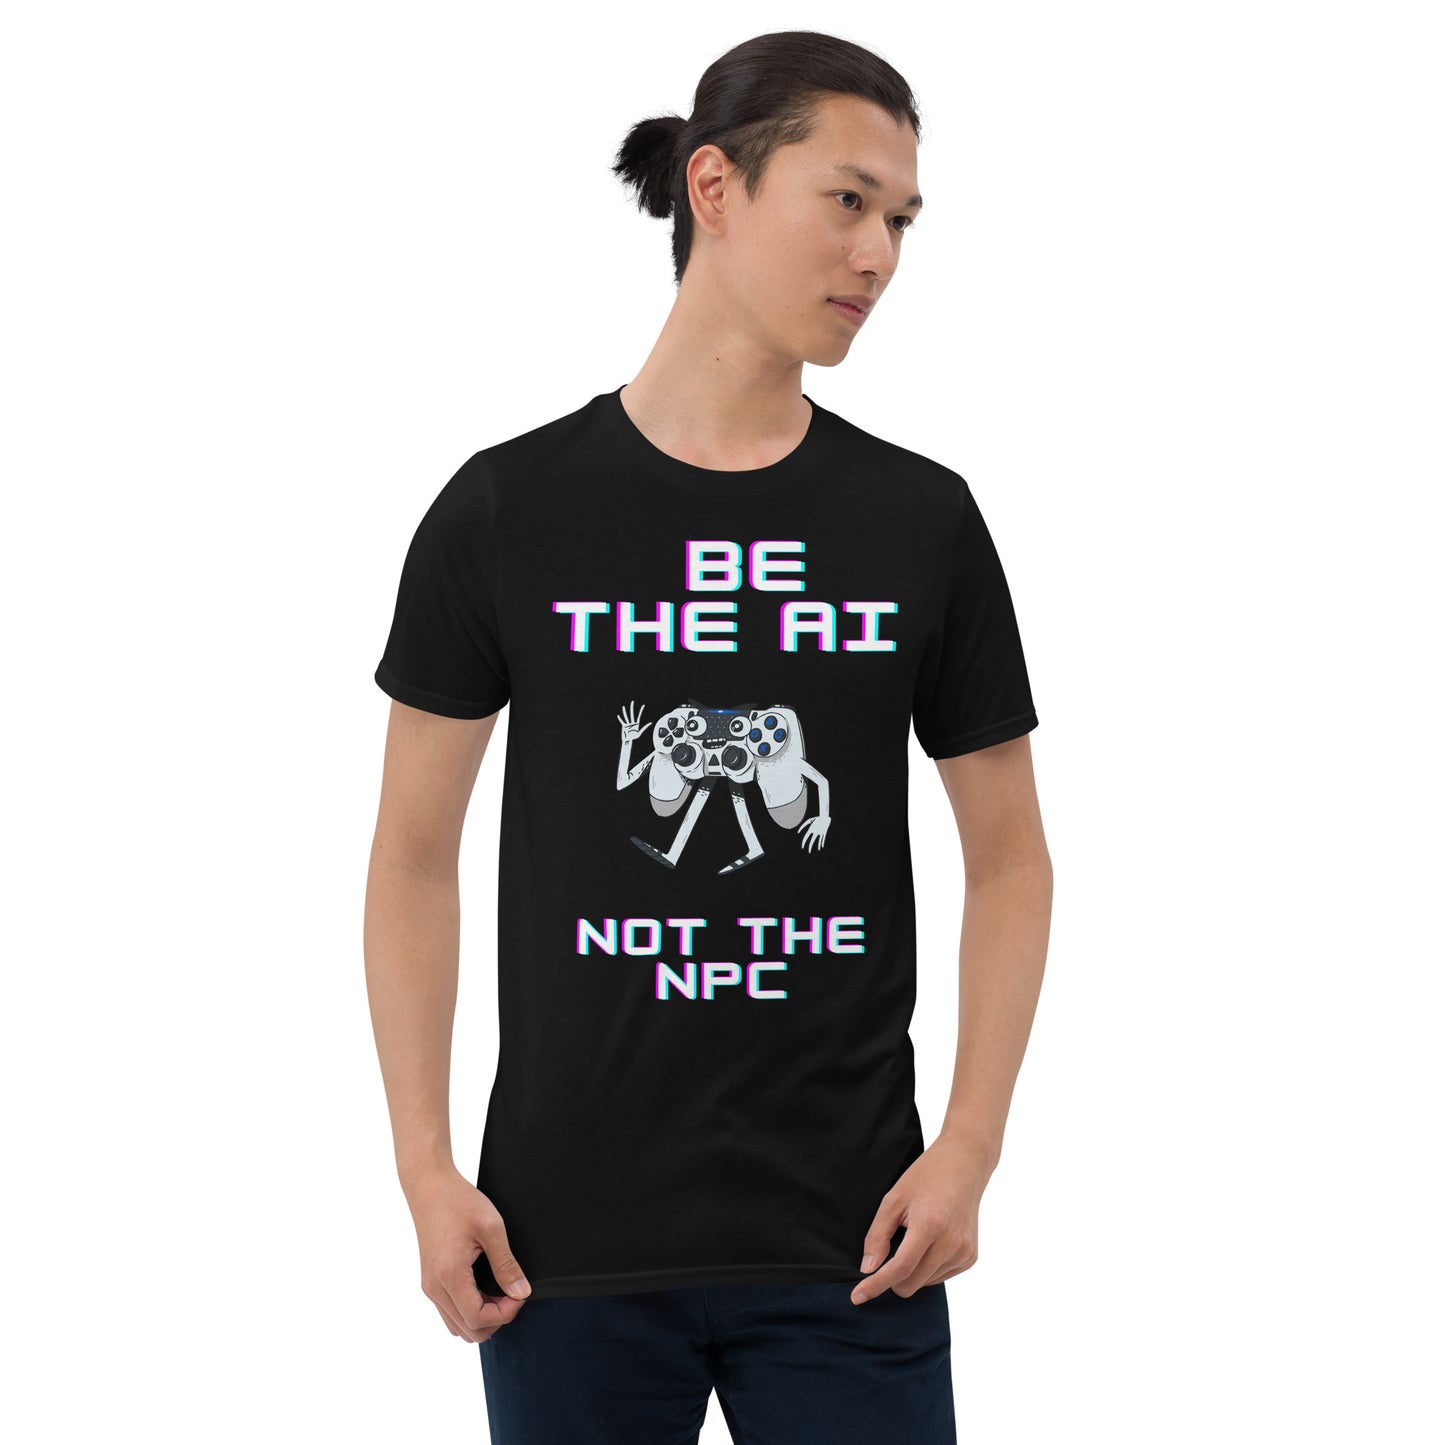 Man in black short-sleeve t-shirt that says be the AI not the NPC